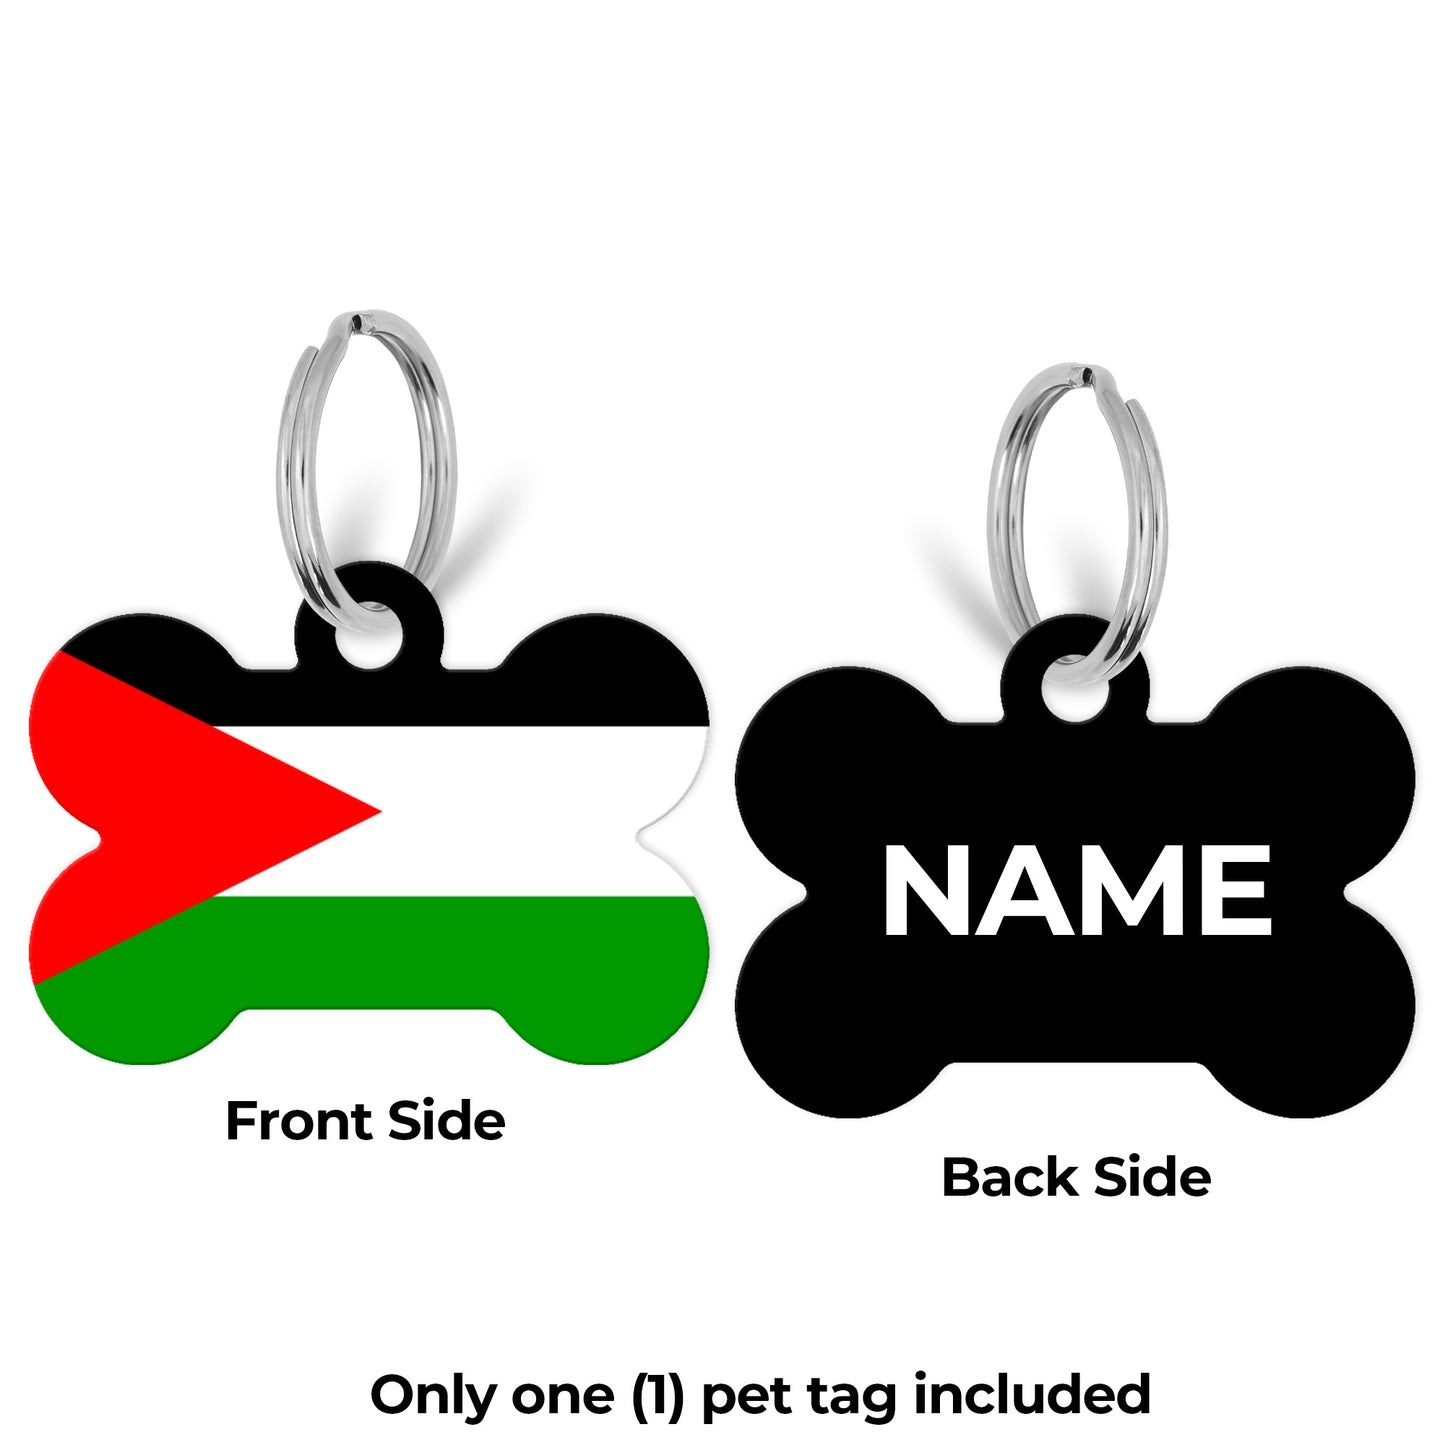 Pick Your World Flag Personalized Bone Shaped Pet Tag for Dogs and Cats with Pet Name